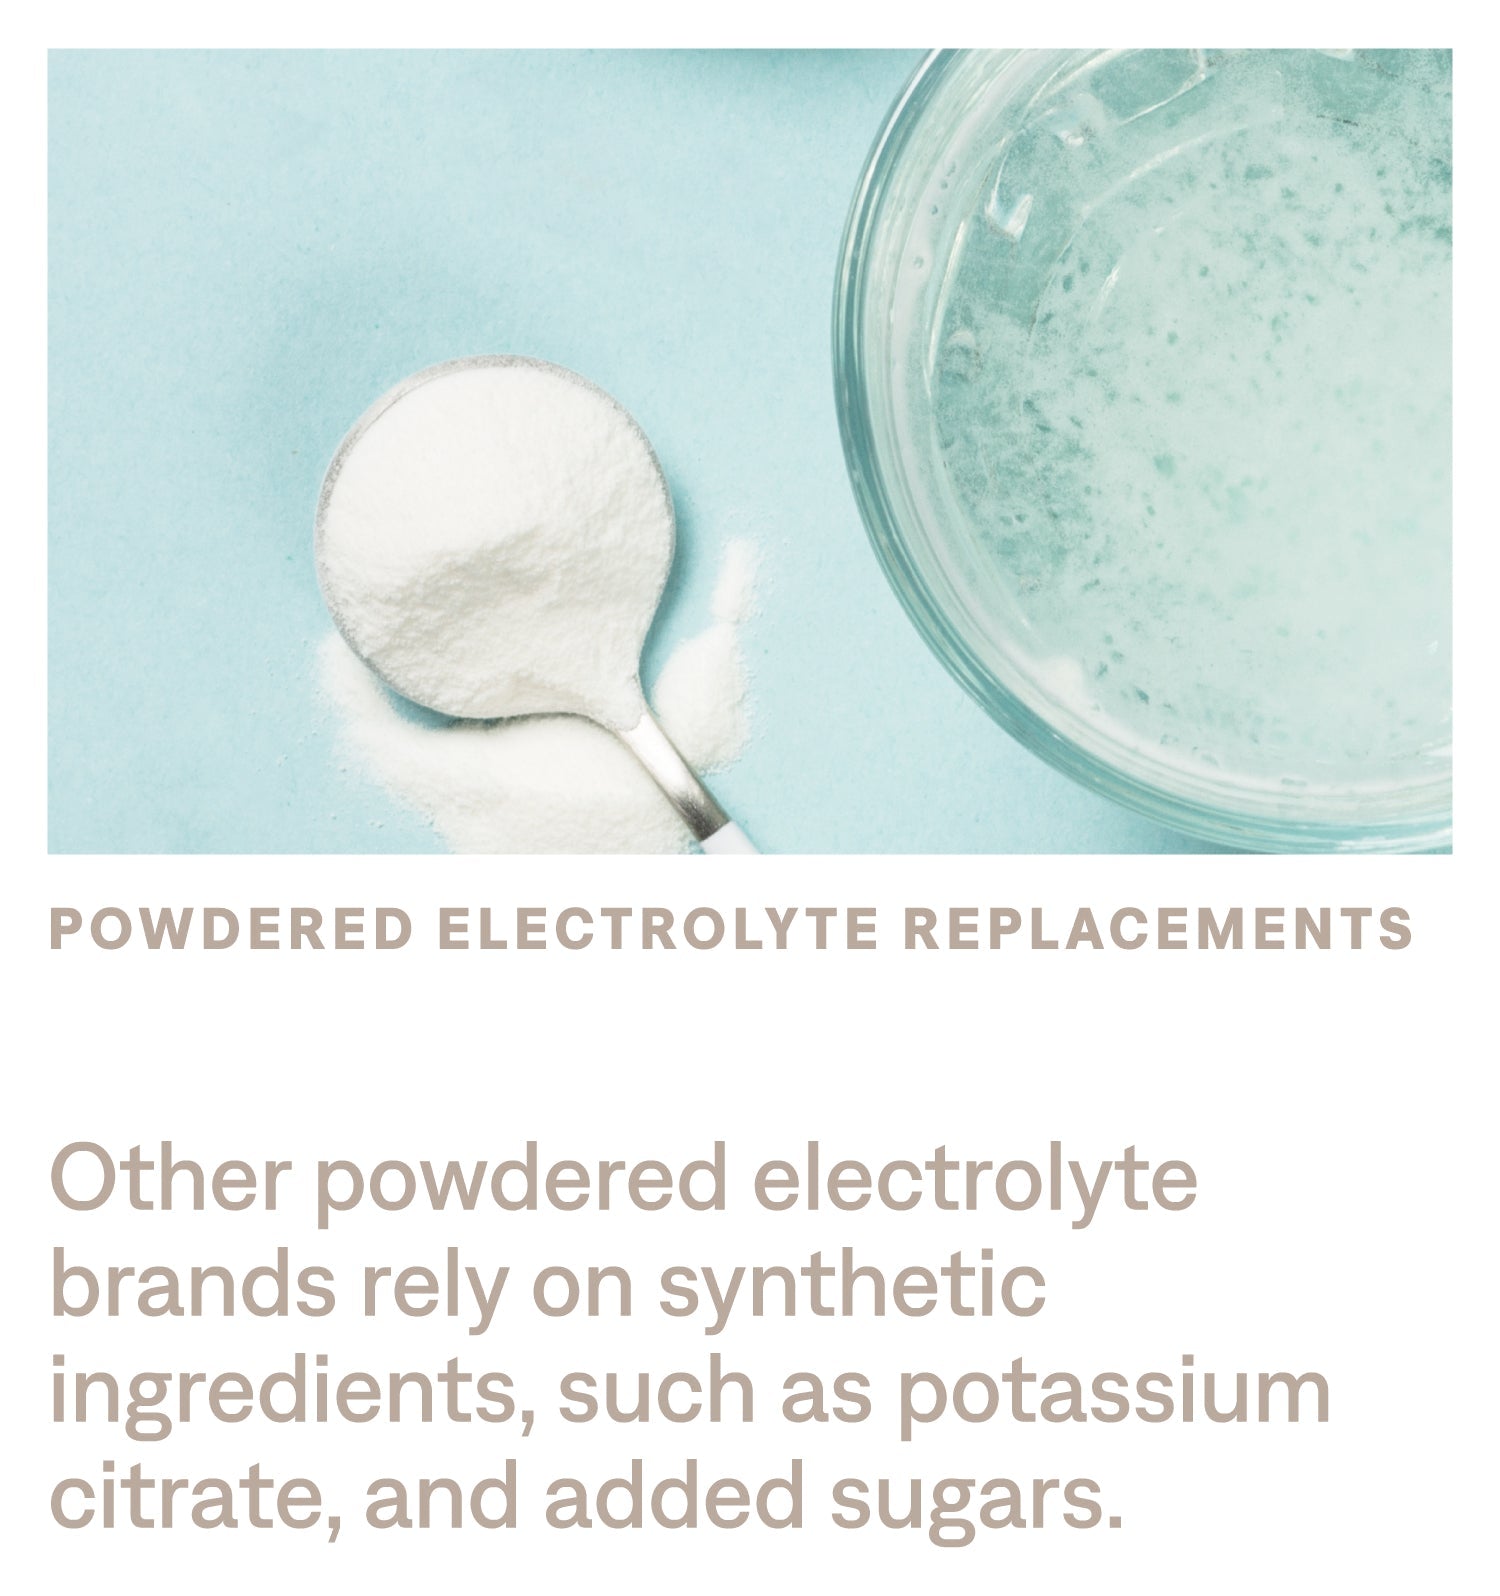 Other powdered electrolyte brands rely on synthetic ingredients, such as potassium citrate, and added sugars.